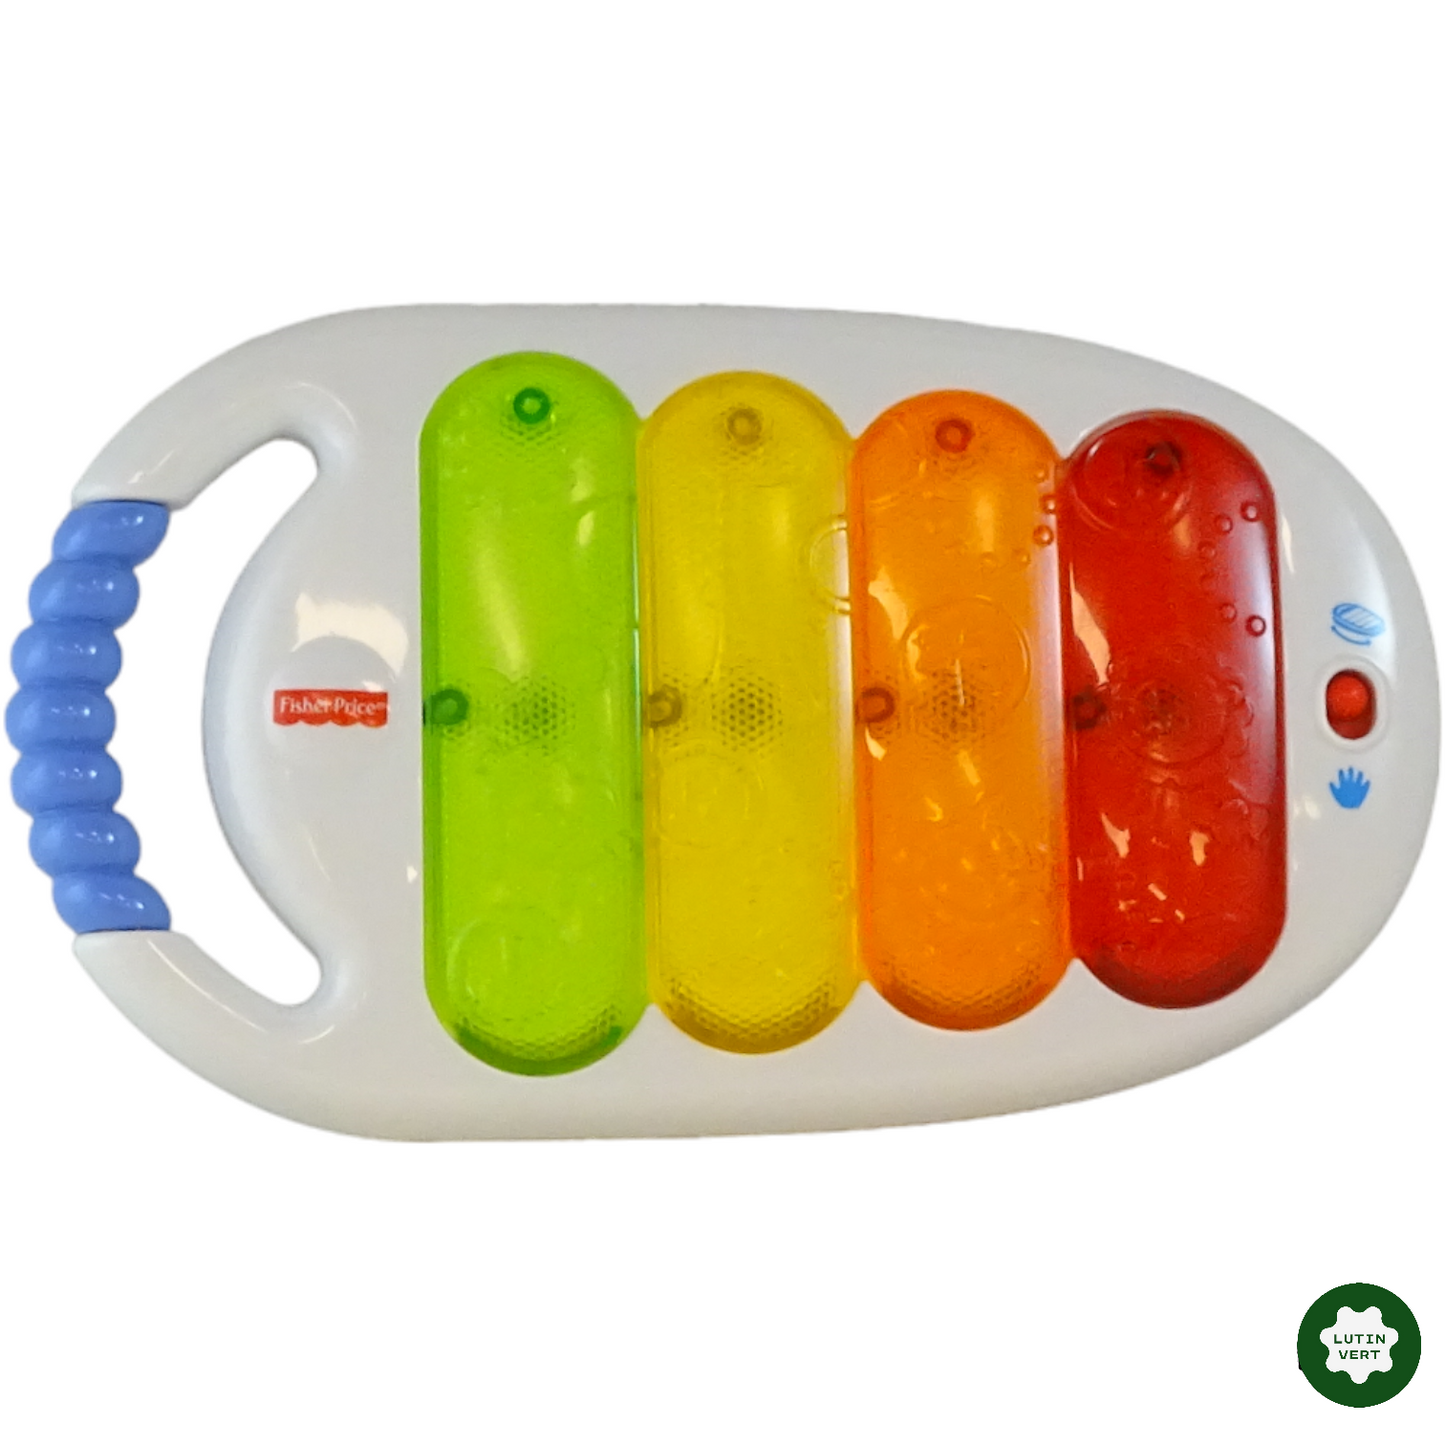 Piano musical d'occasion FISHER PRICE  - Dès 2 ans | Lutin Vert